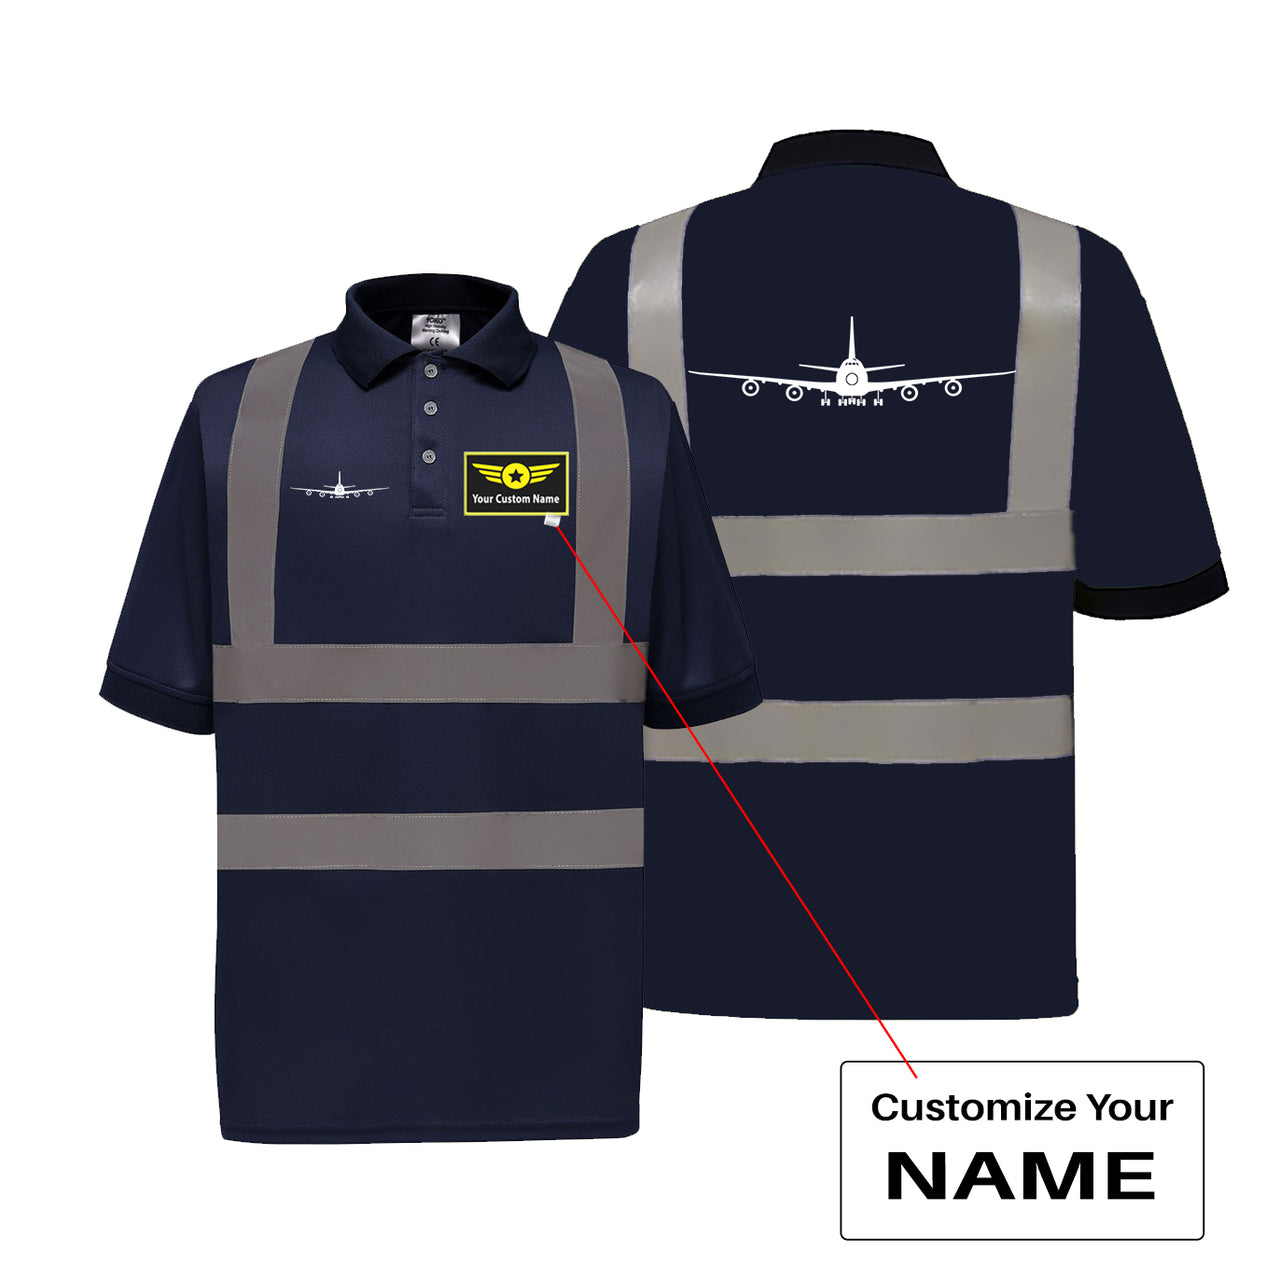 Boeing 747 Silhouette Designed Reflective Polo T-Shirts